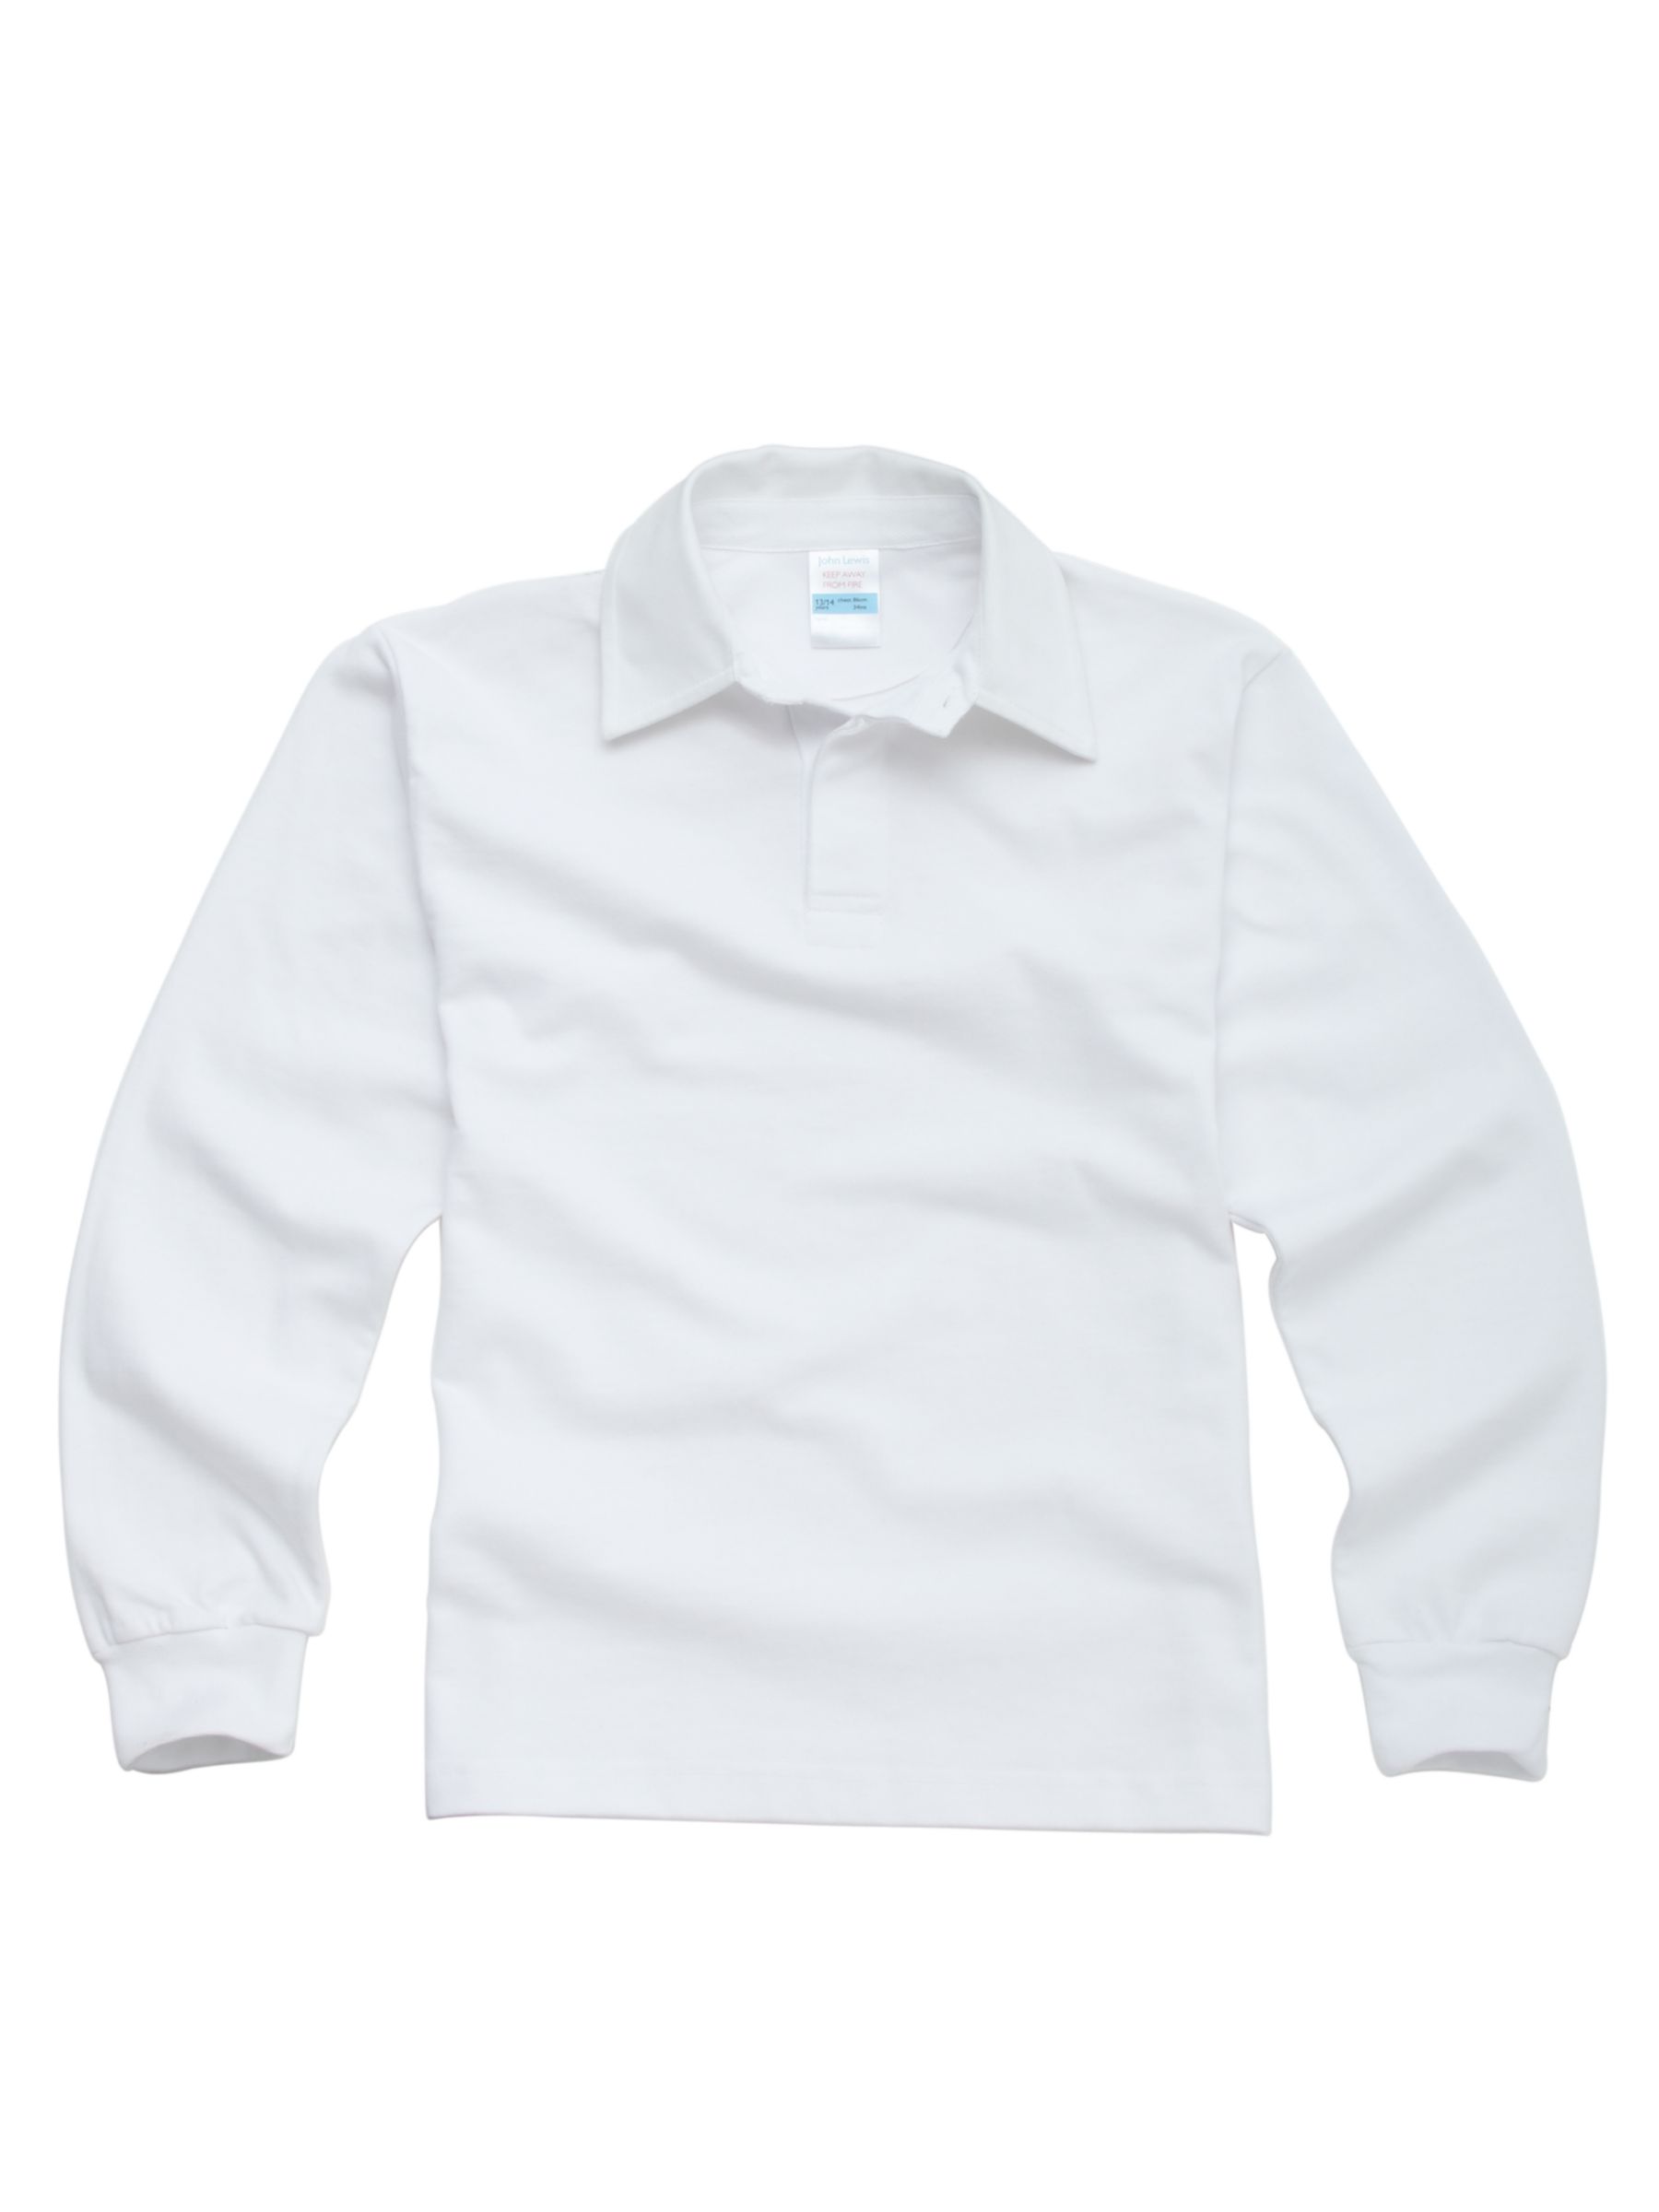 Westminster Abbey Choir School Rugby Shirt, White